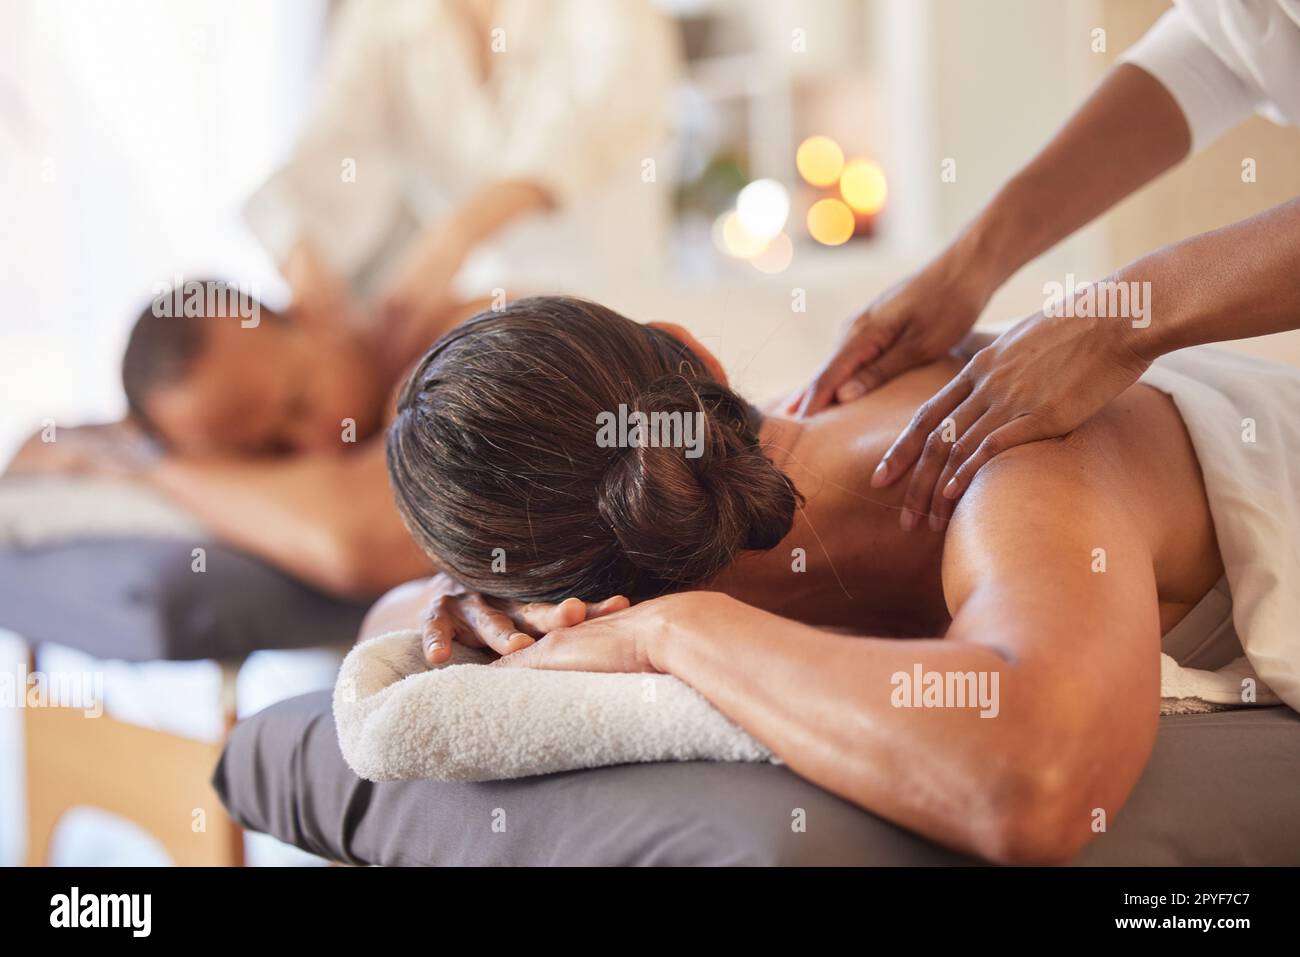 Massage, relax and peace with couple in spa for healing, health and zen treatment. Detox, skincare and beauty with hands of massage therapist on man and woman for calm, physical therapy and luxury Stock Photo